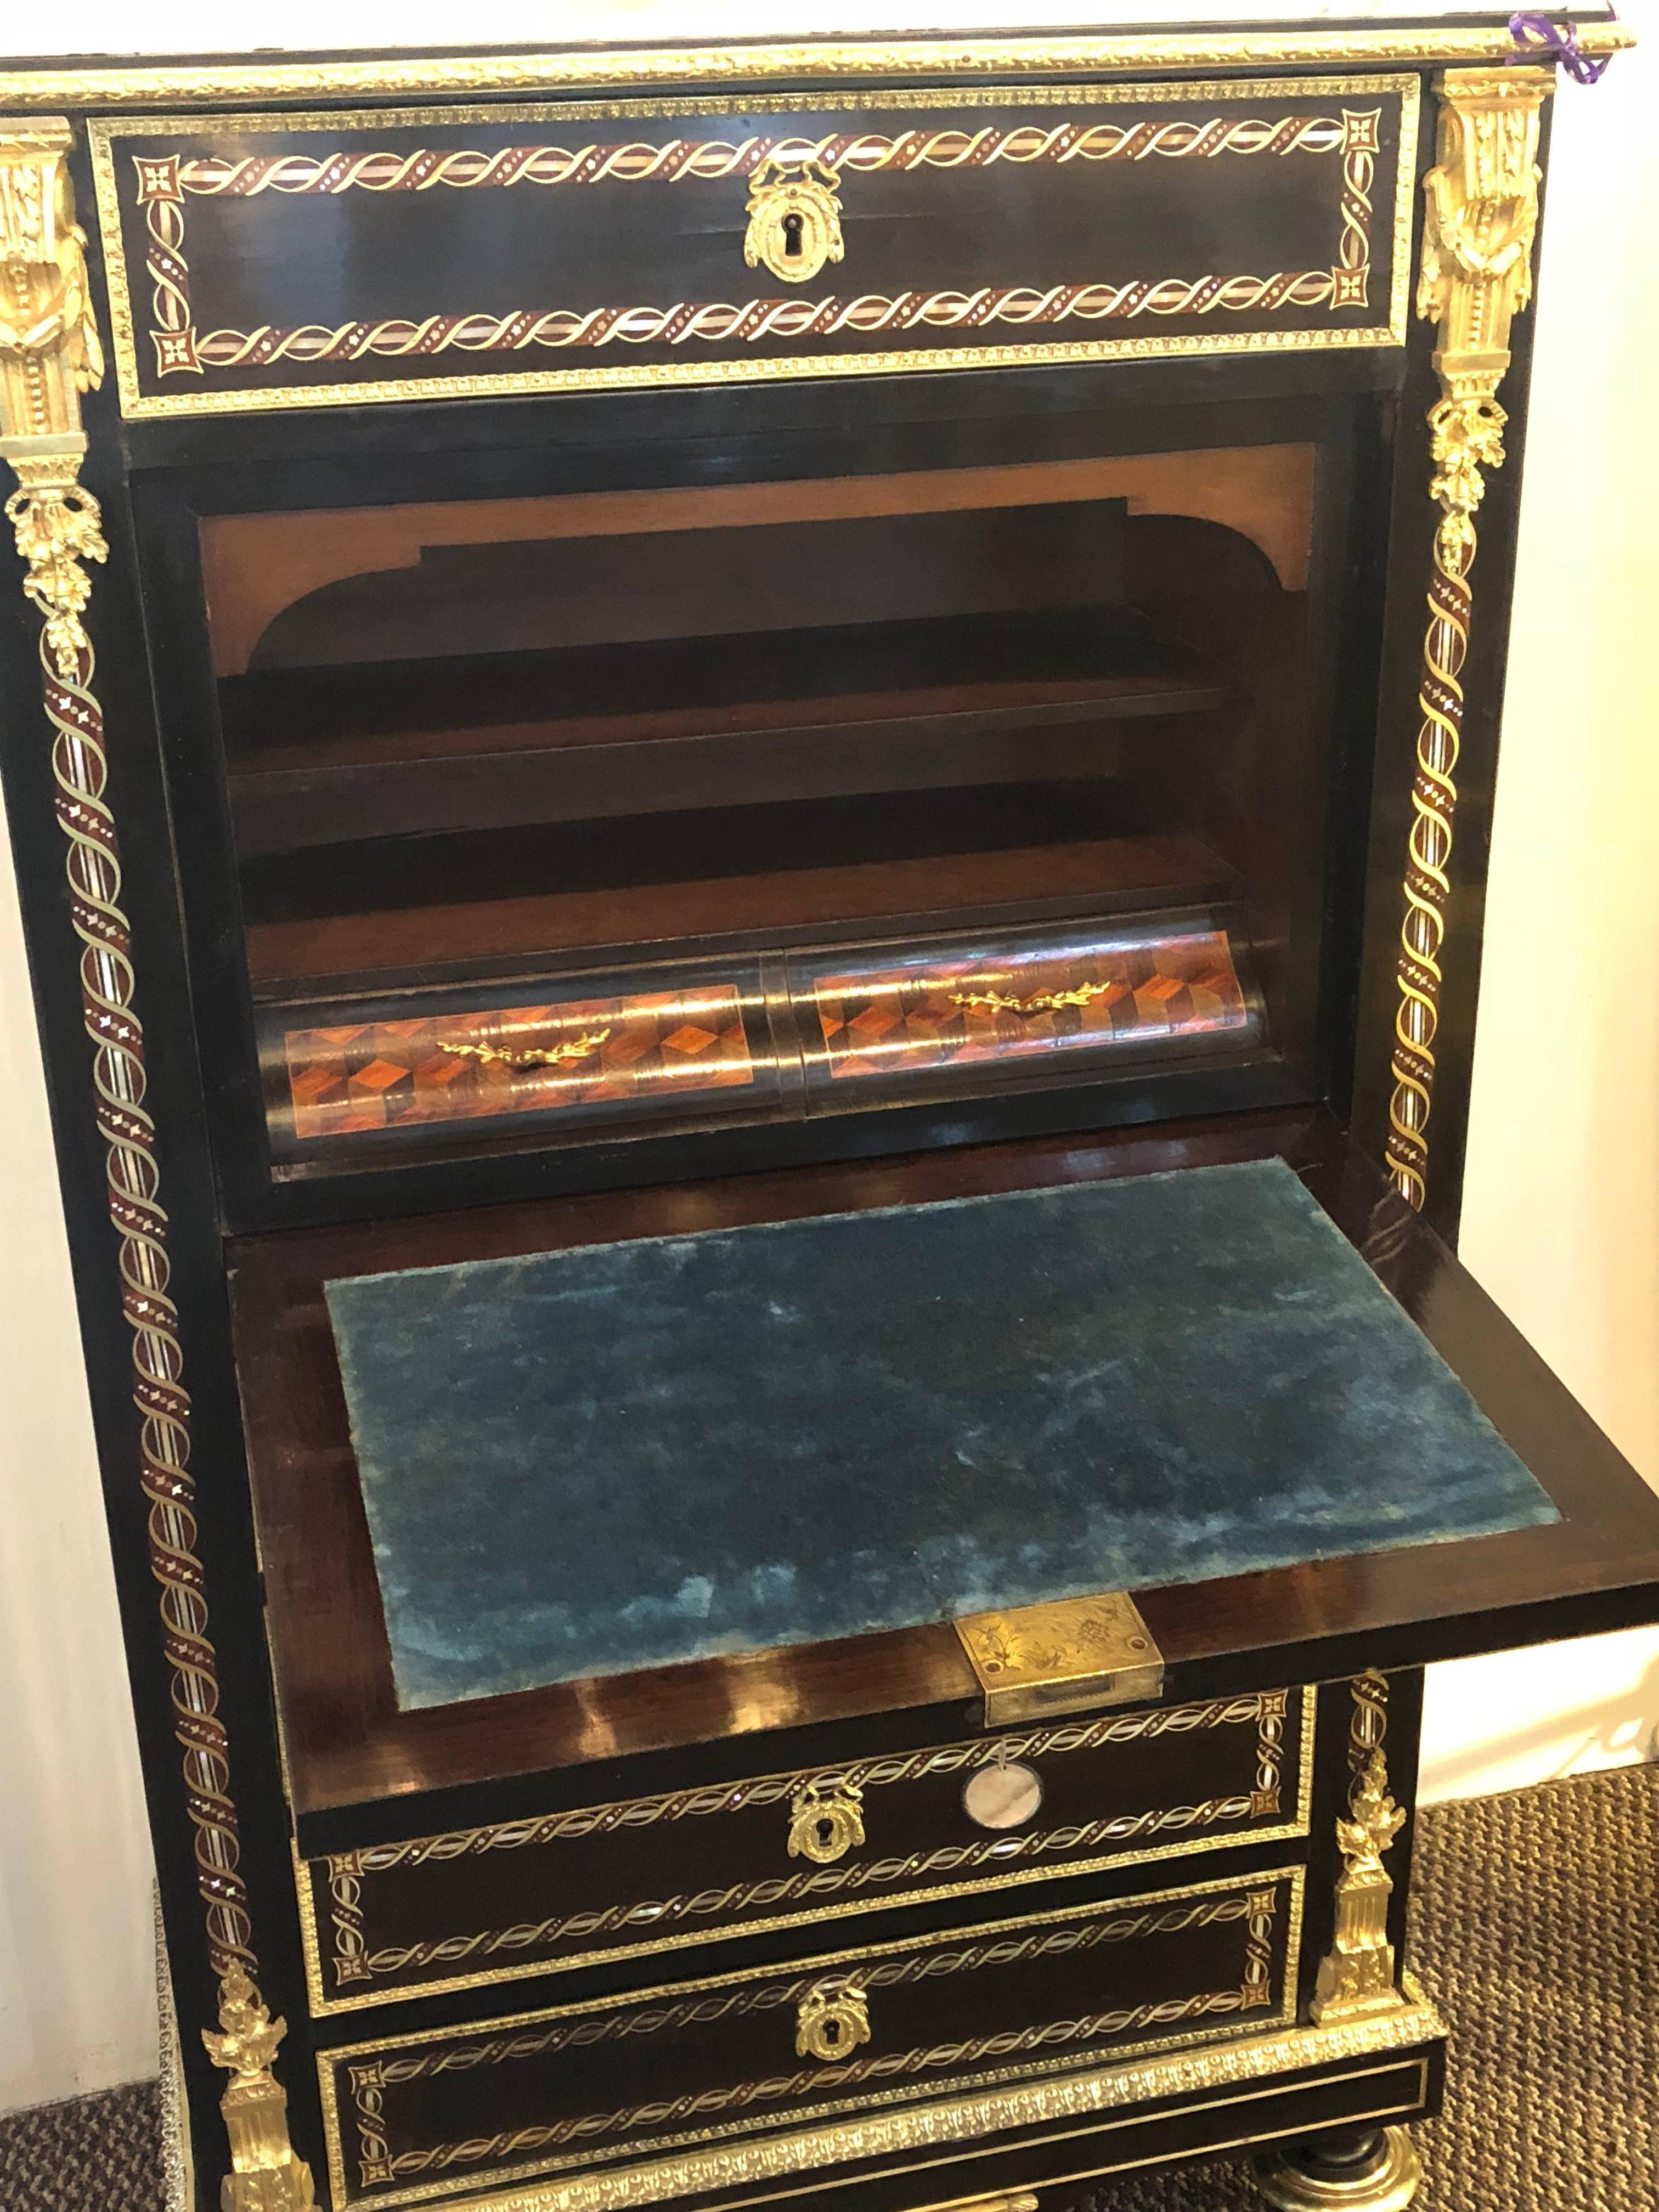 Edwardian, Tall Secretaire, Black Lacquer, Bronze, Abalone Inlay, Marble, 1880s For Sale 4